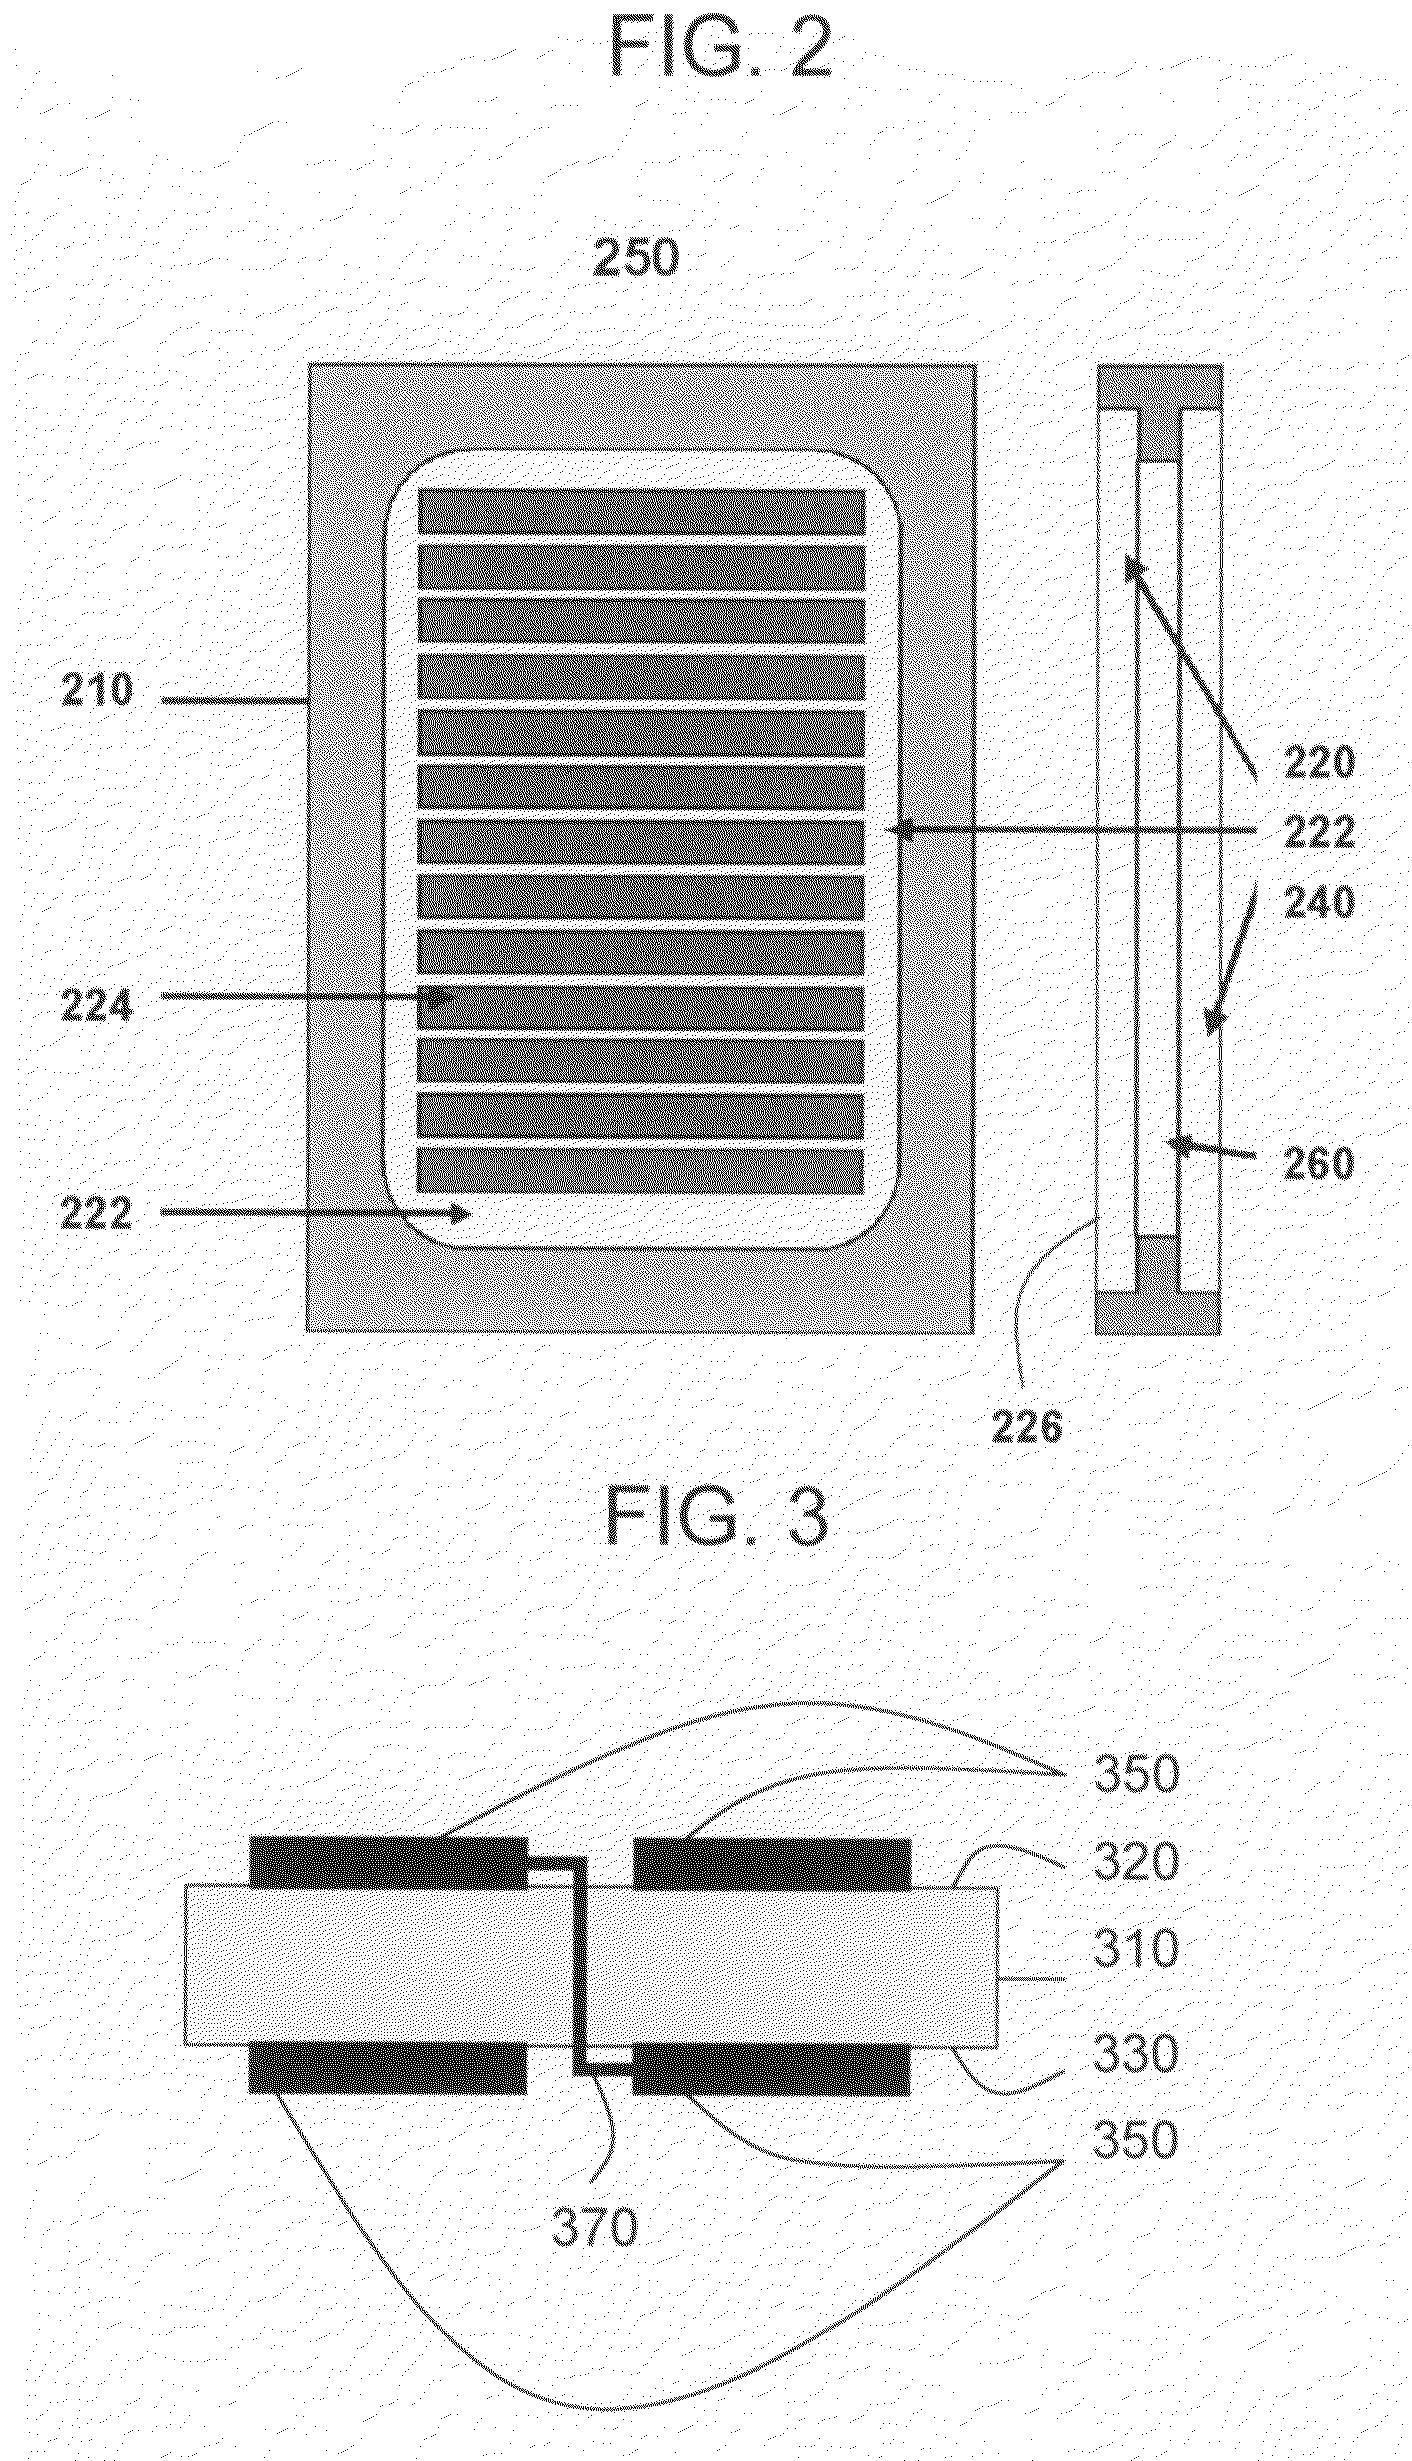 Segmented solid oxide fuel cell stack and methods for operation and use thereof